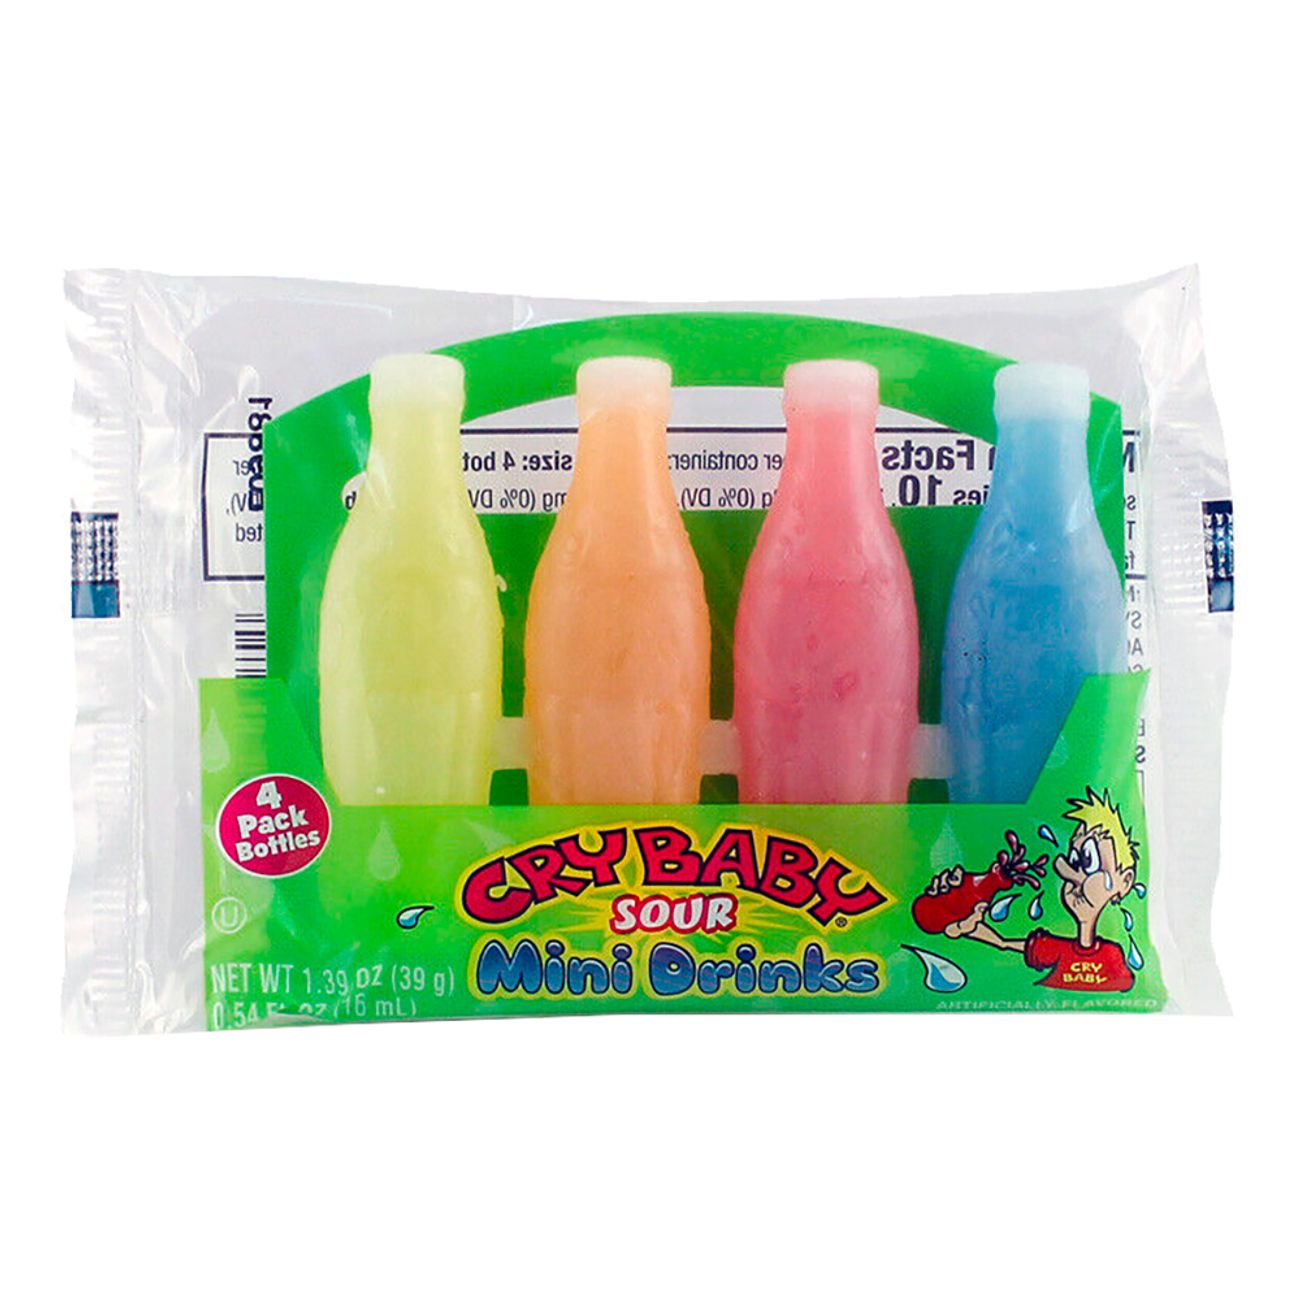 cry-baby-sour-wax-bottles-99588-2